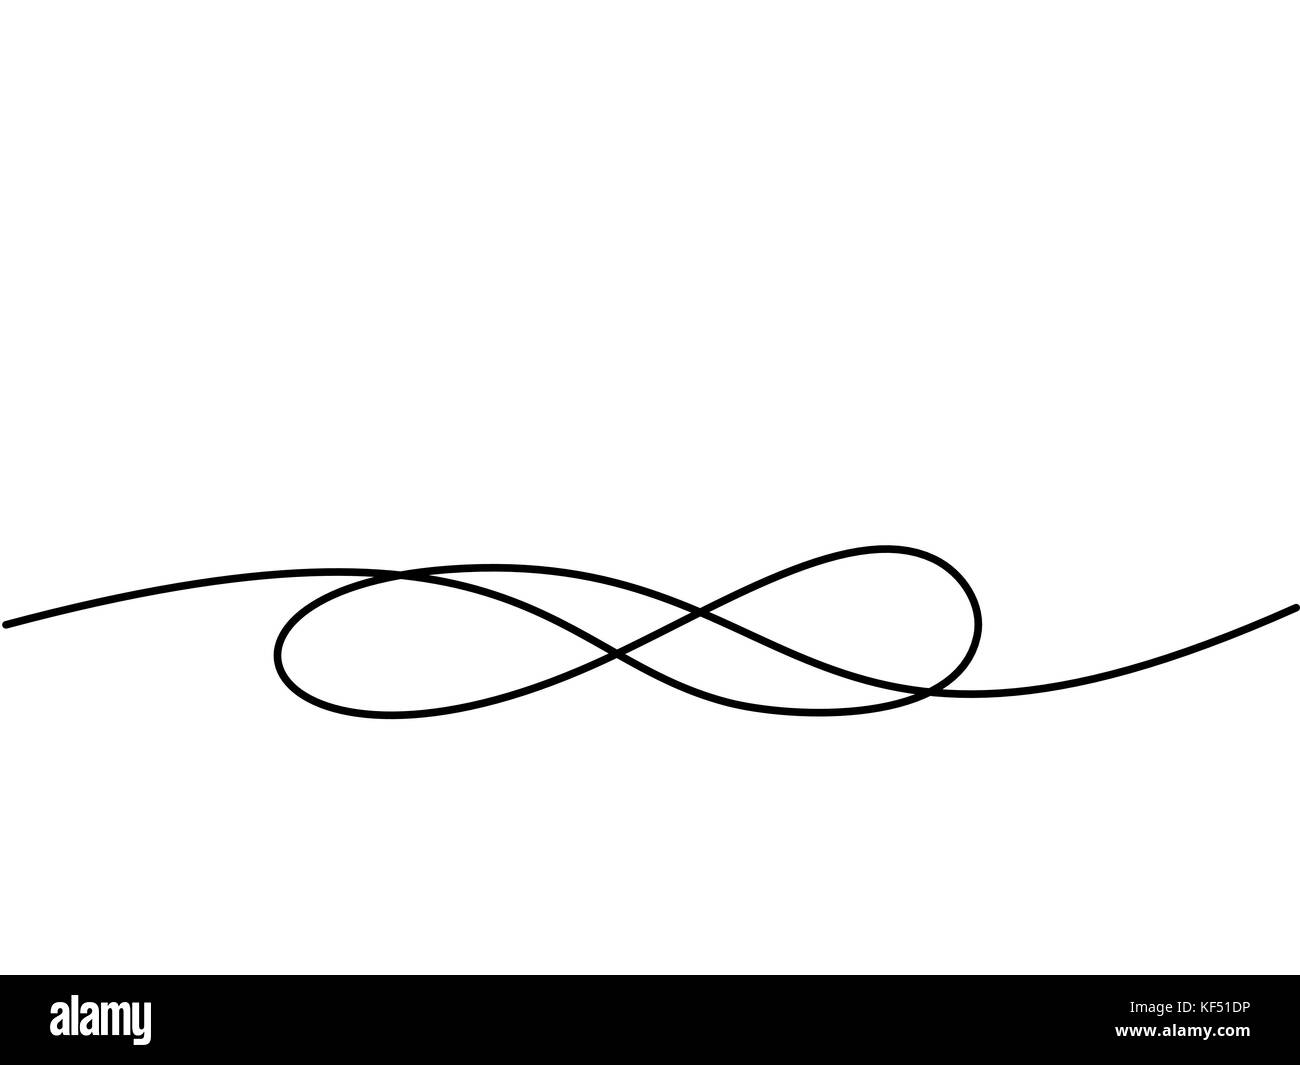 Infinity symbol. Continuous line drawing icon. Vector illustration Stock Vector